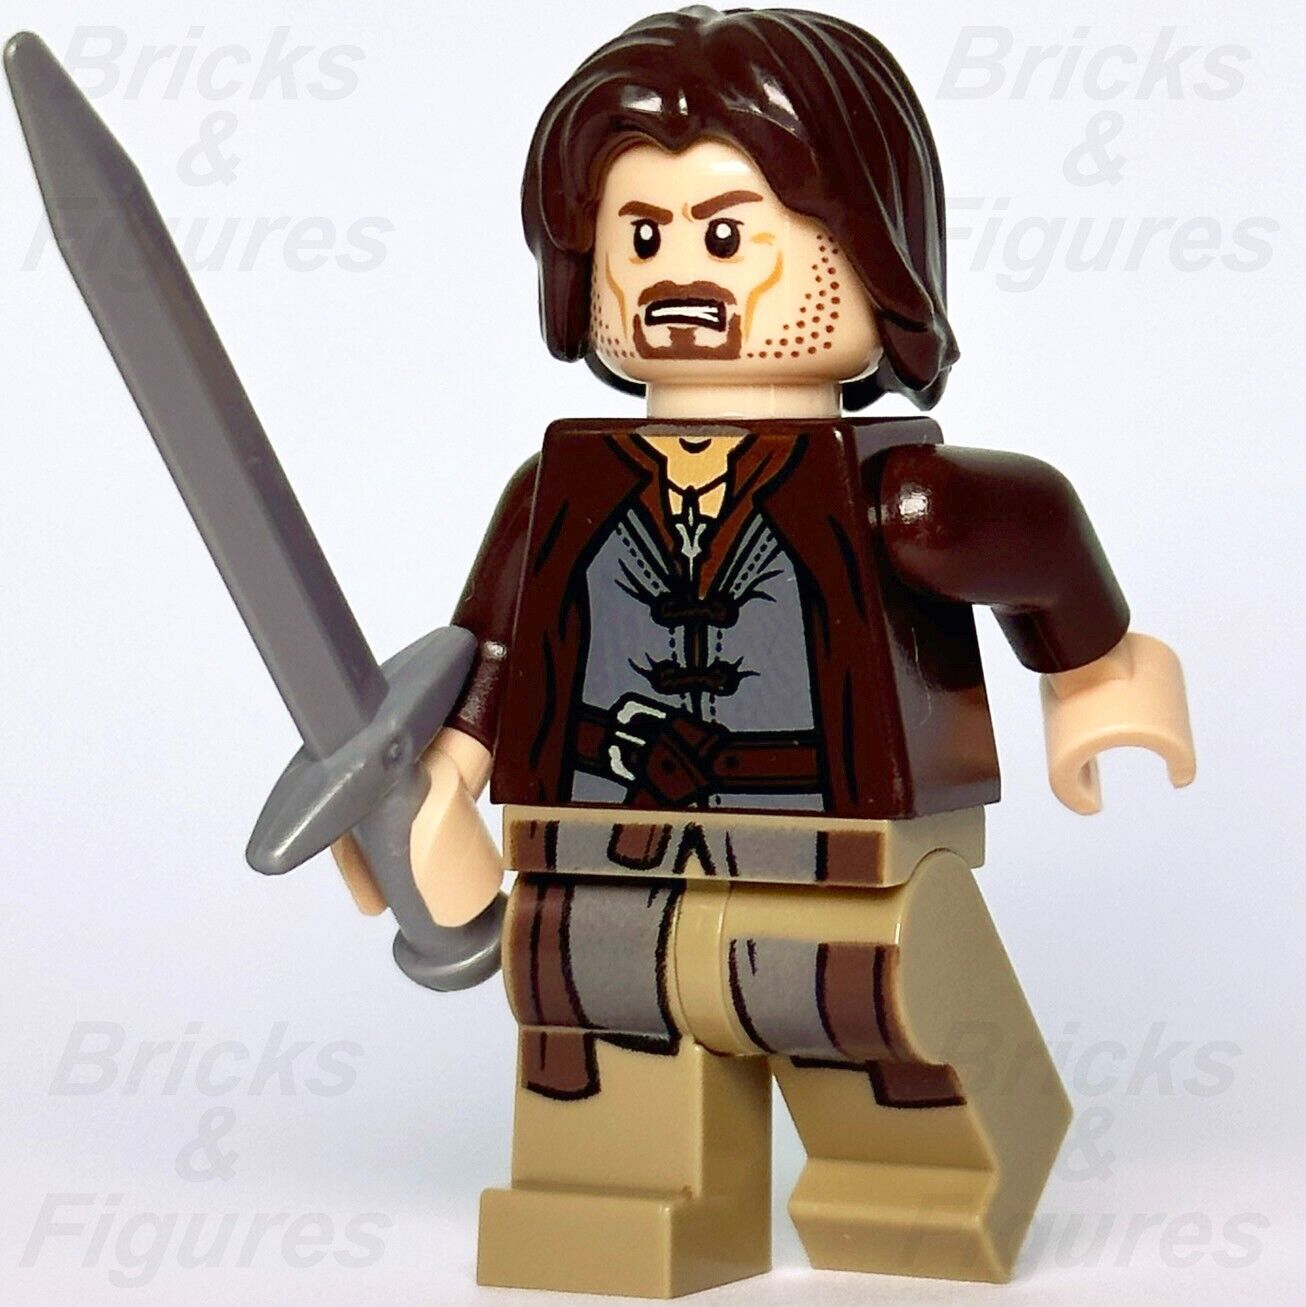 LEGO Aragorn Minifigure The Hobbit & The Lord of the Rings 9472 9474 lor017 - Bricks & Figures